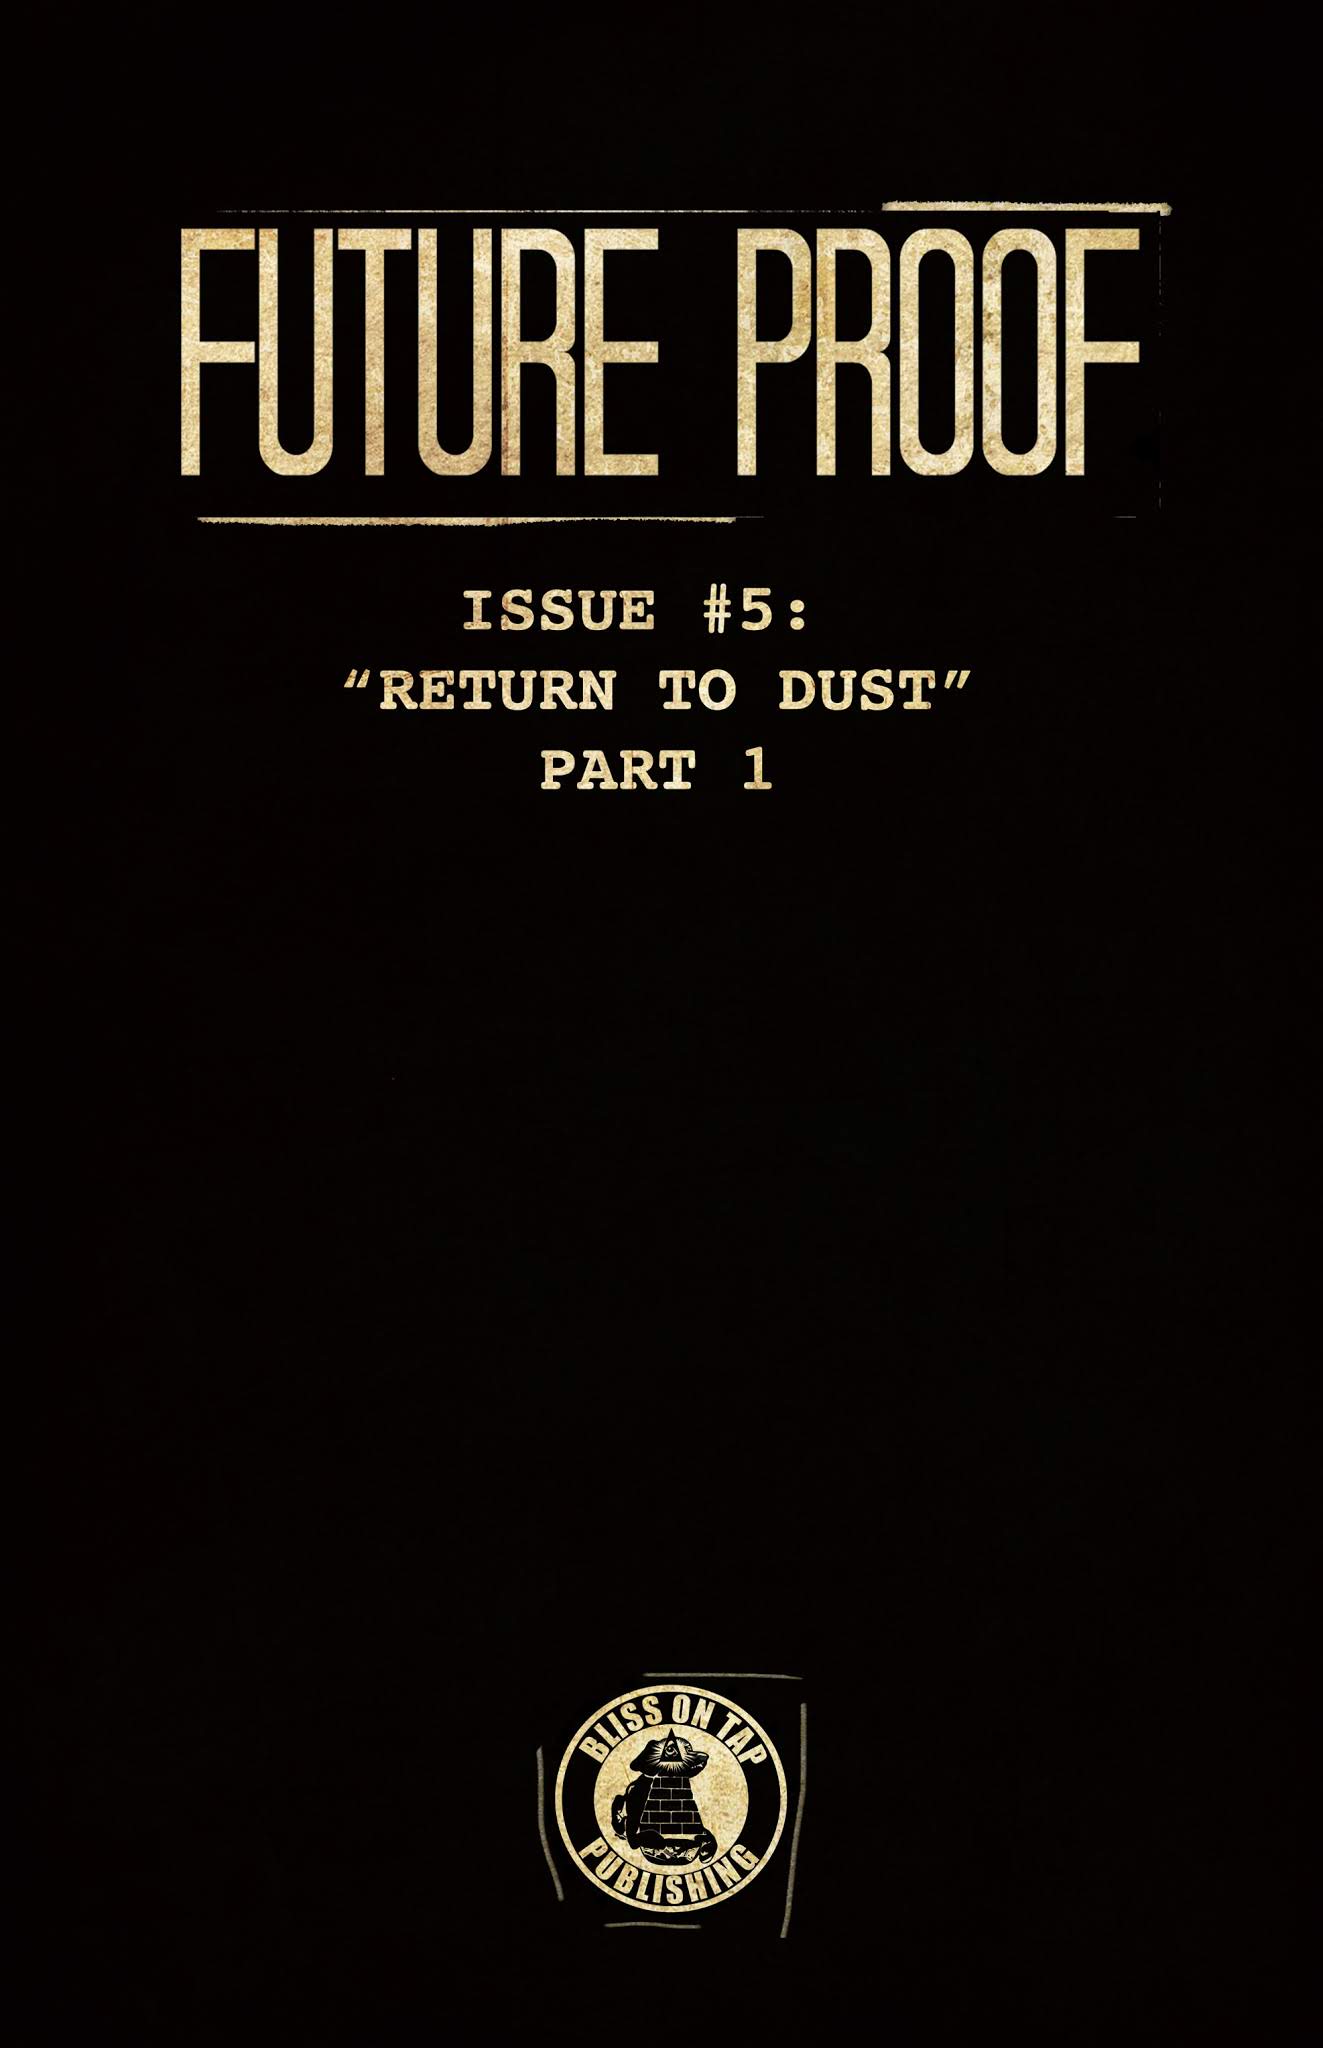 Read online Future Proof comic -  Issue #5 - 3